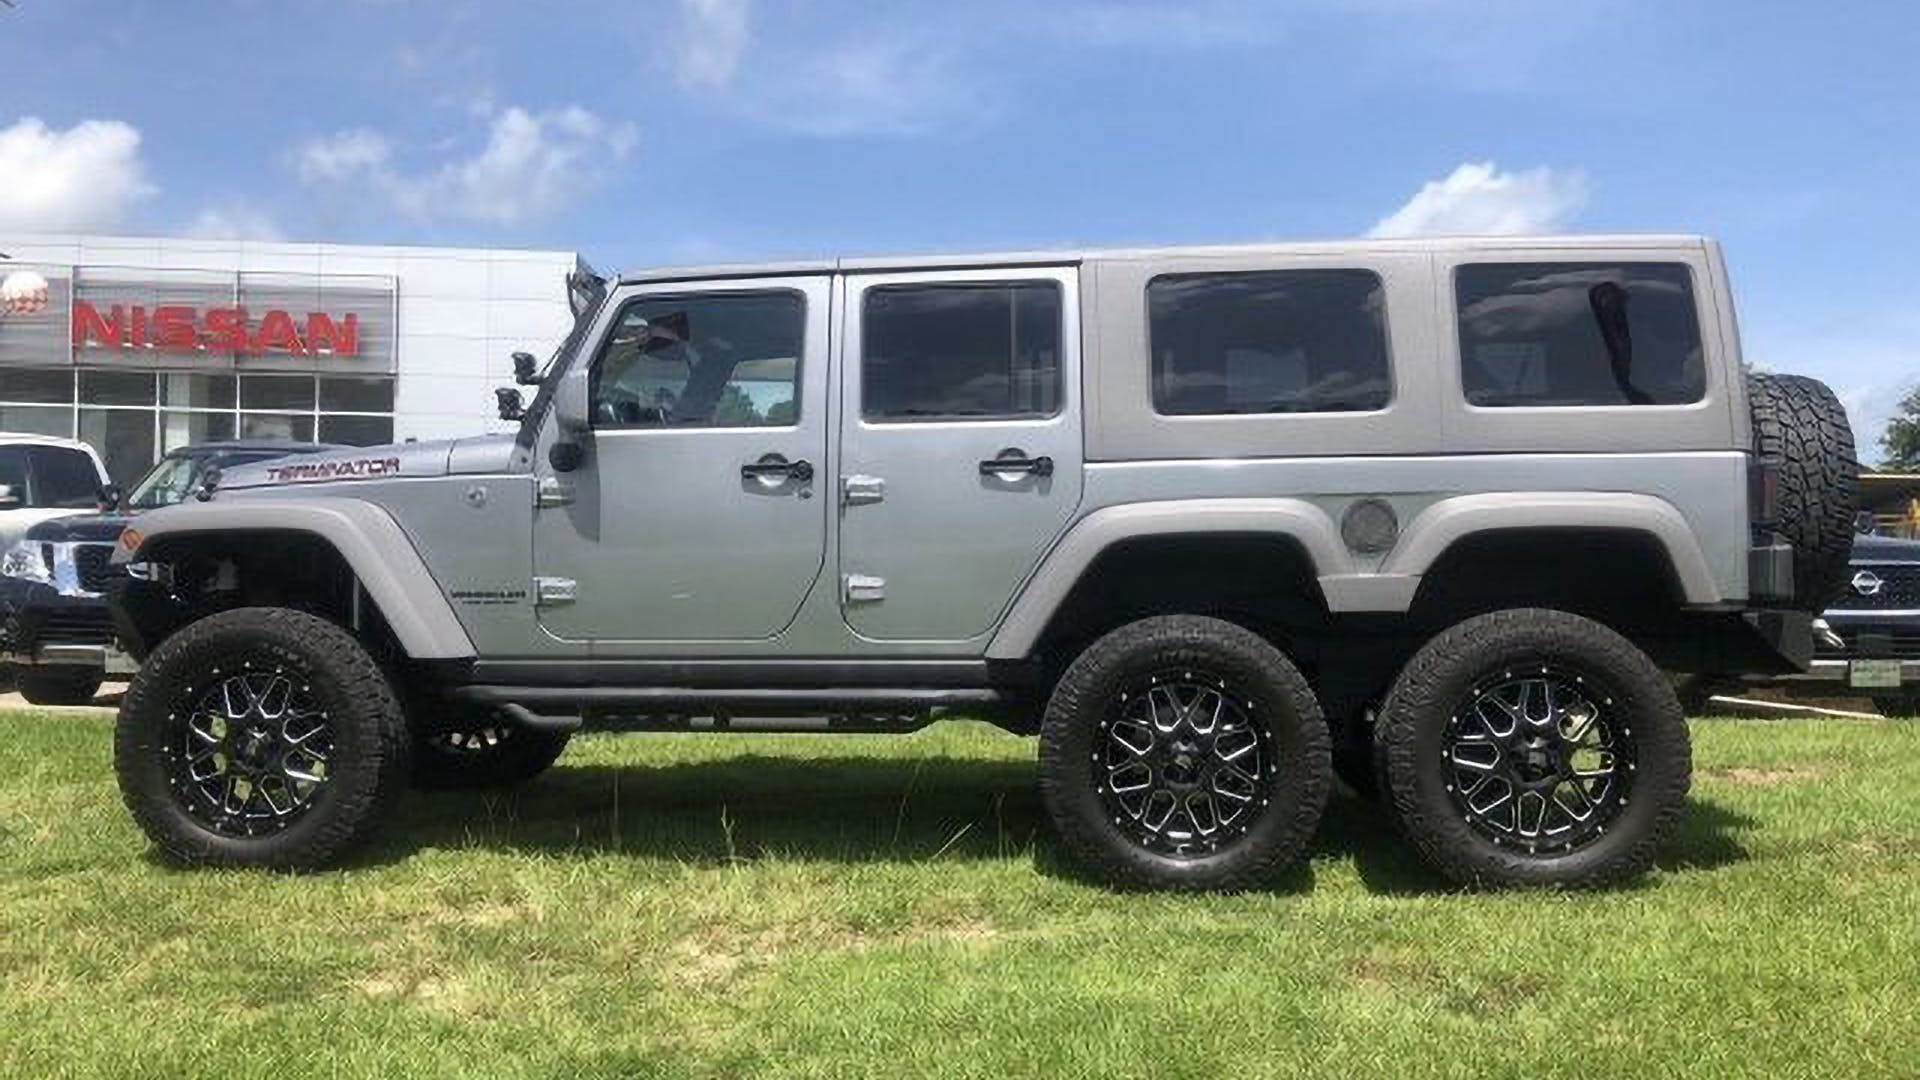 How Much Does a Jeep Wrangler Weigh? Checked and Selected the Right